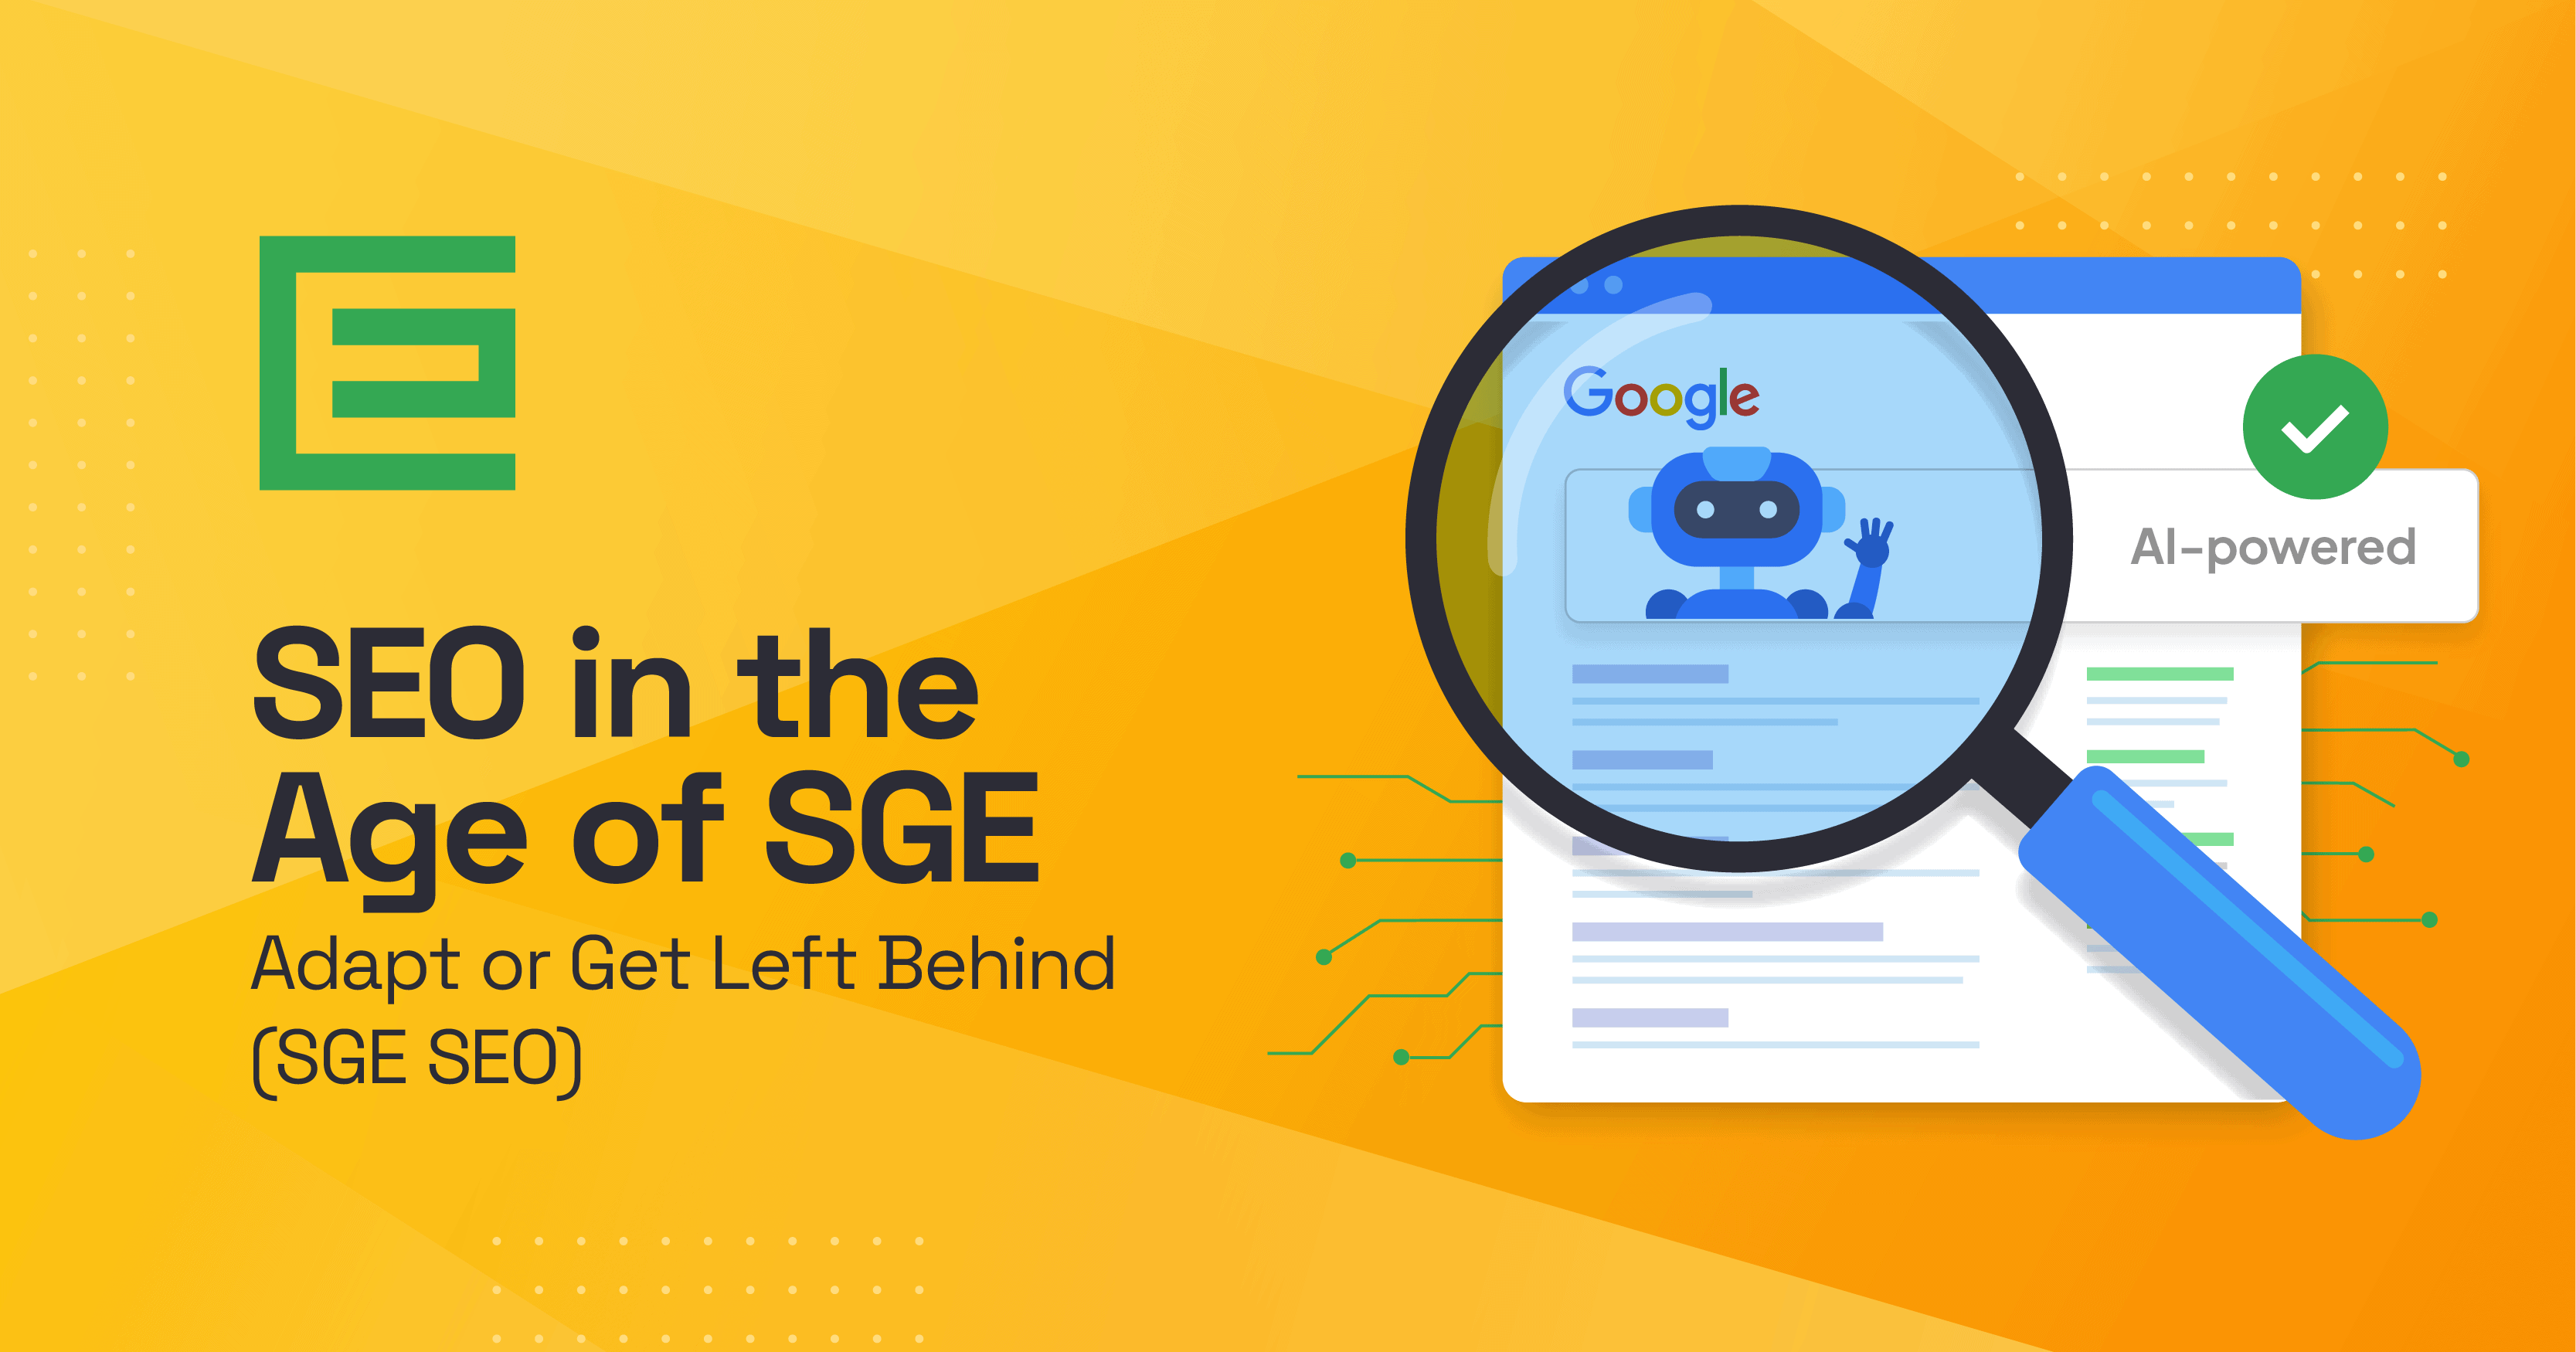 Adapt or Get Left Behind (SEO for SGE)